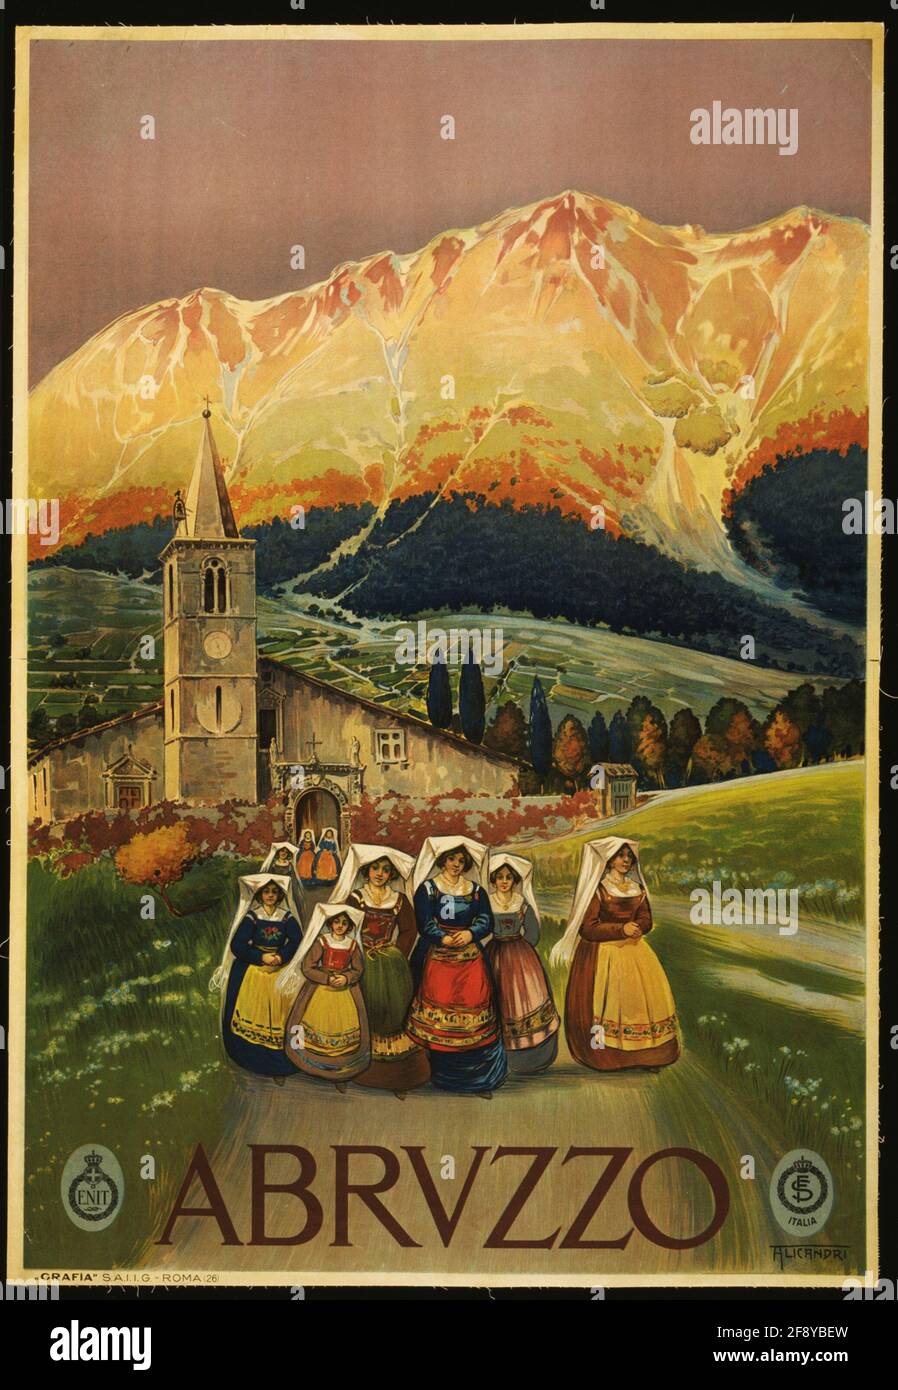 A vintage travel poster forAbruzzo in Italy Stock Photo